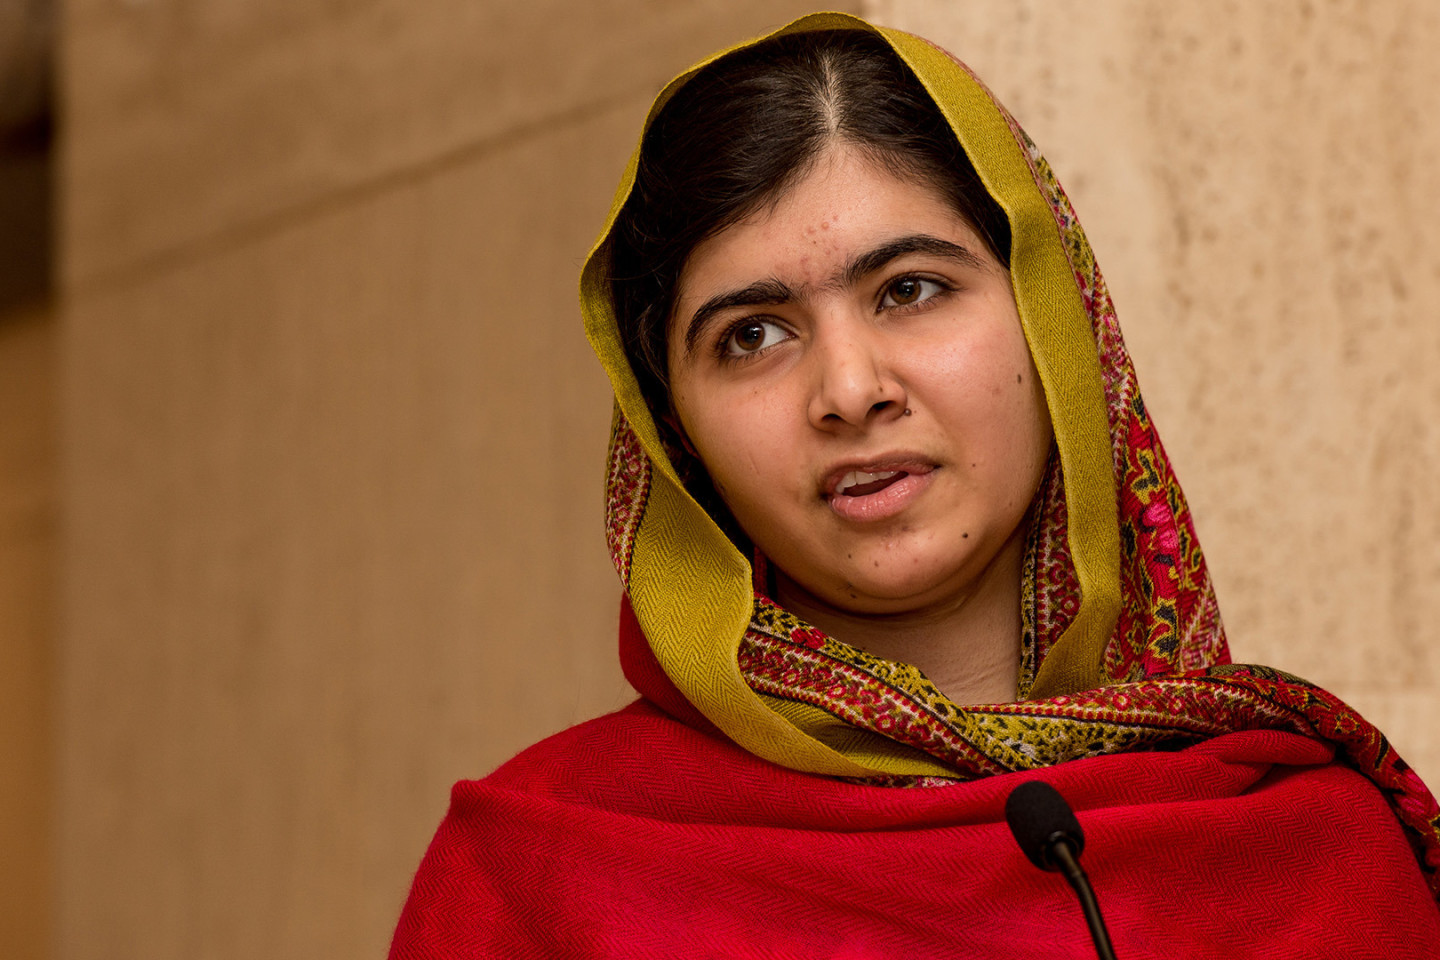 TOMS and Malala Yousafzai Are Teaming Up to Get Every Girl in School